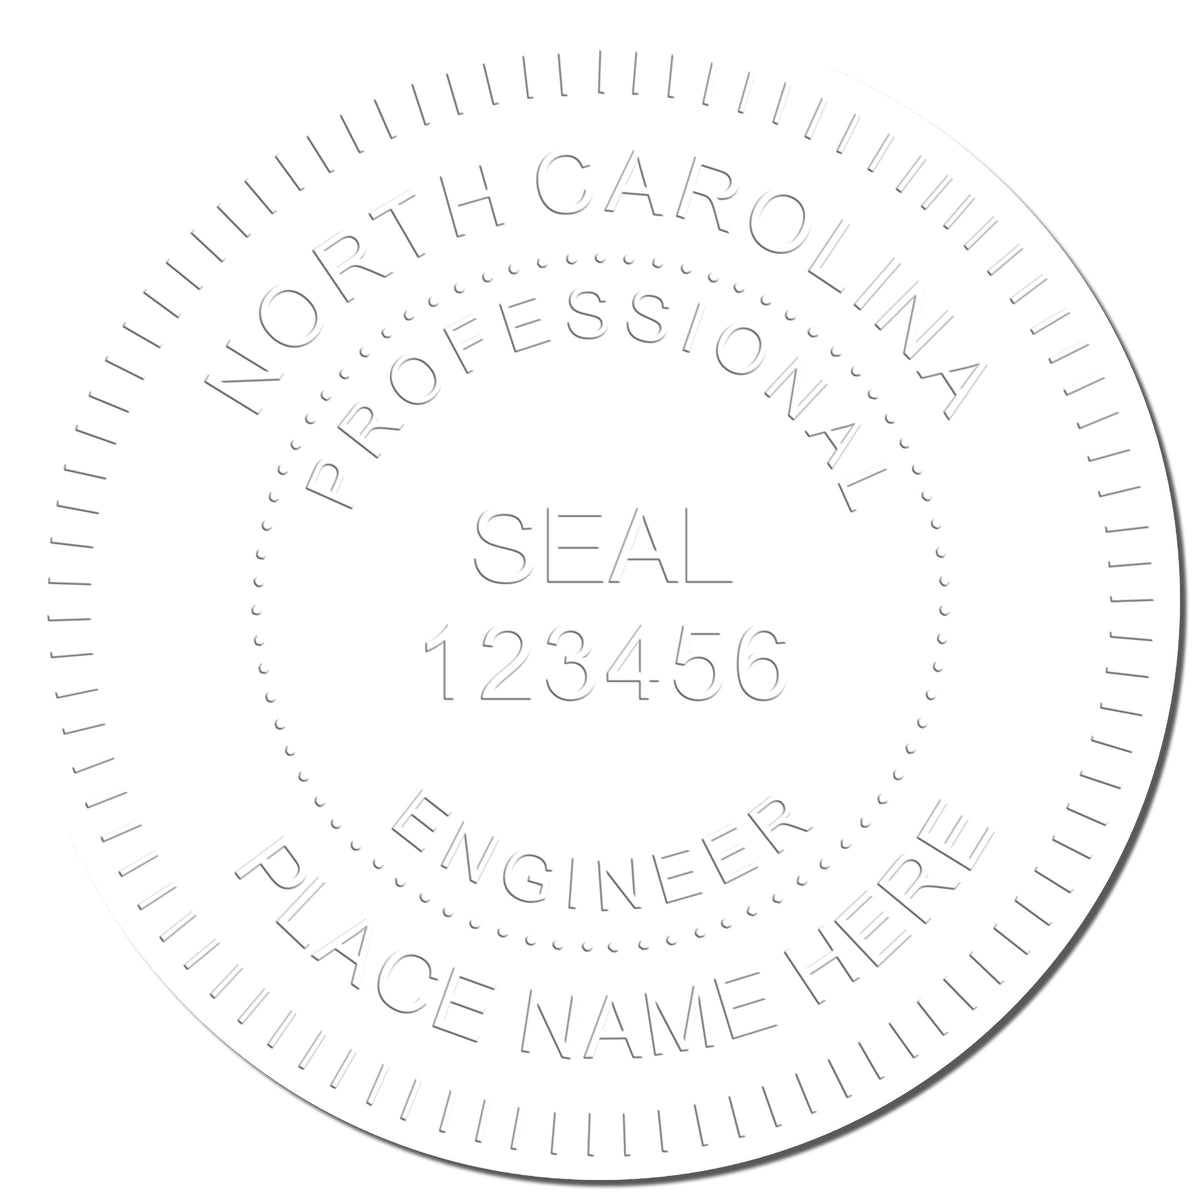 This paper is stamped with a sample imprint of the Heavy Duty Cast Iron North Carolina Engineer Seal Embosser, signifying its quality and reliability.